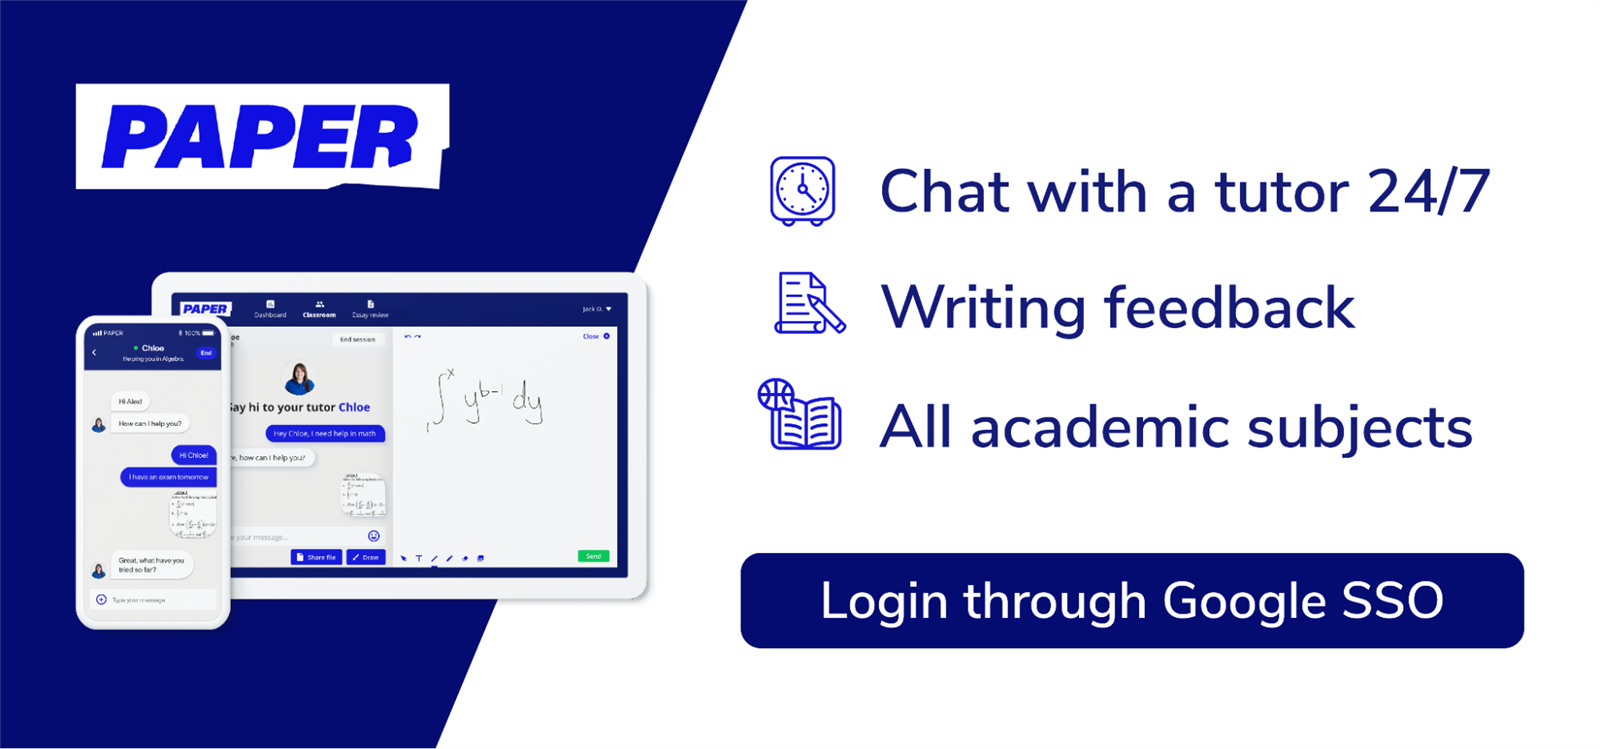 Paper page banner. Chat with a tutor 24/7. Writing feedback. All academic subjectsl